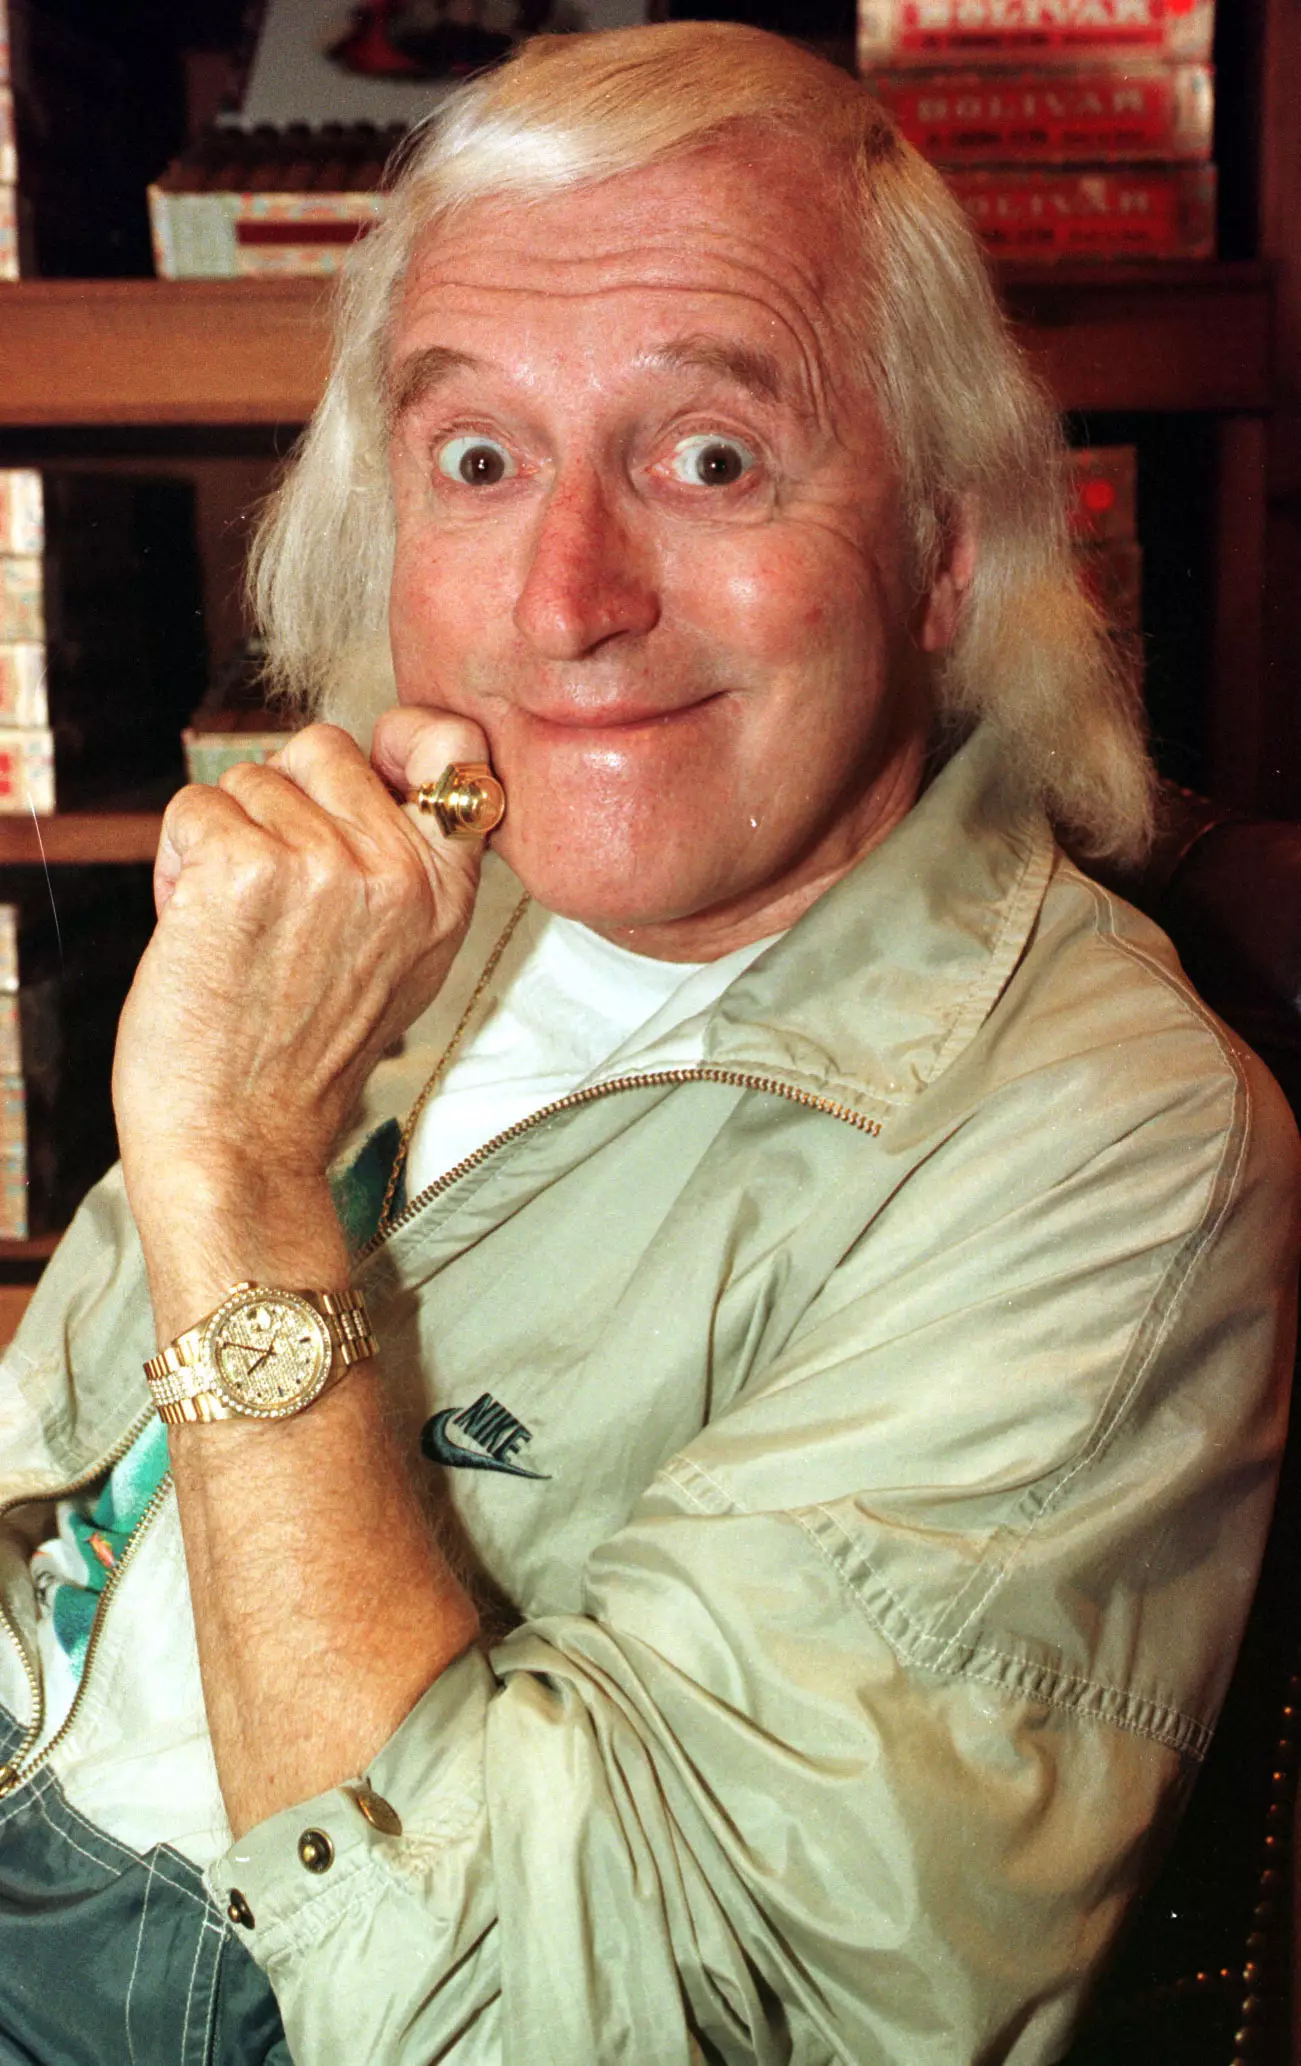 More than 400 people made complaints against Jimmy Savile over six decades.